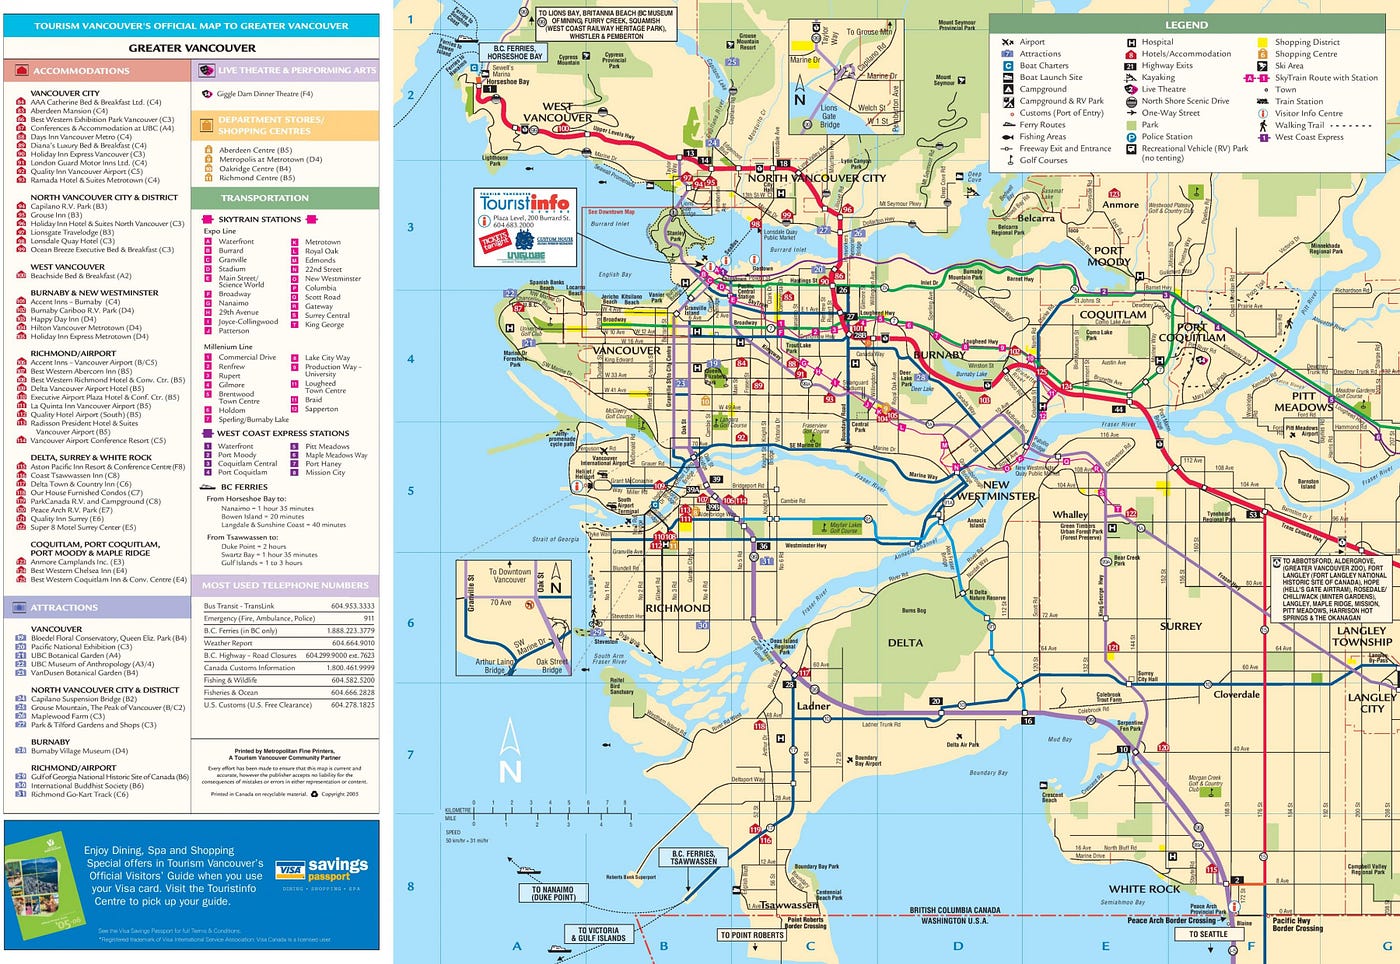 Seattle and Vancouver: Metropolitan Ports of the Pacific Northwest, by  Ariadne Belsito